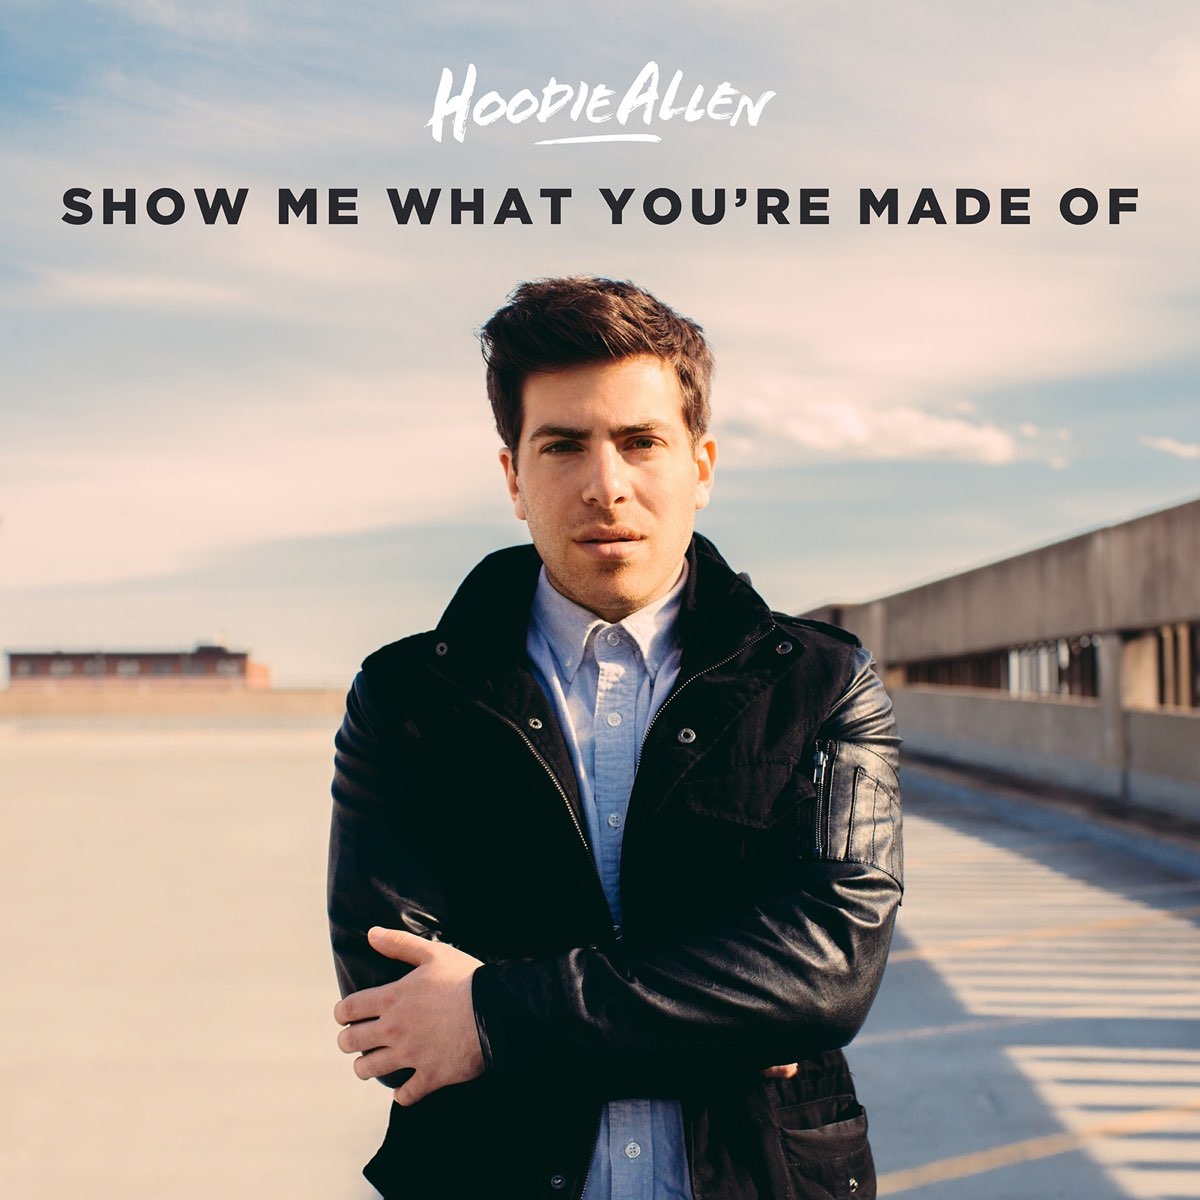 Lady killers feat hoodie allen. Hoodie Allen wasting all my time. Show me what.